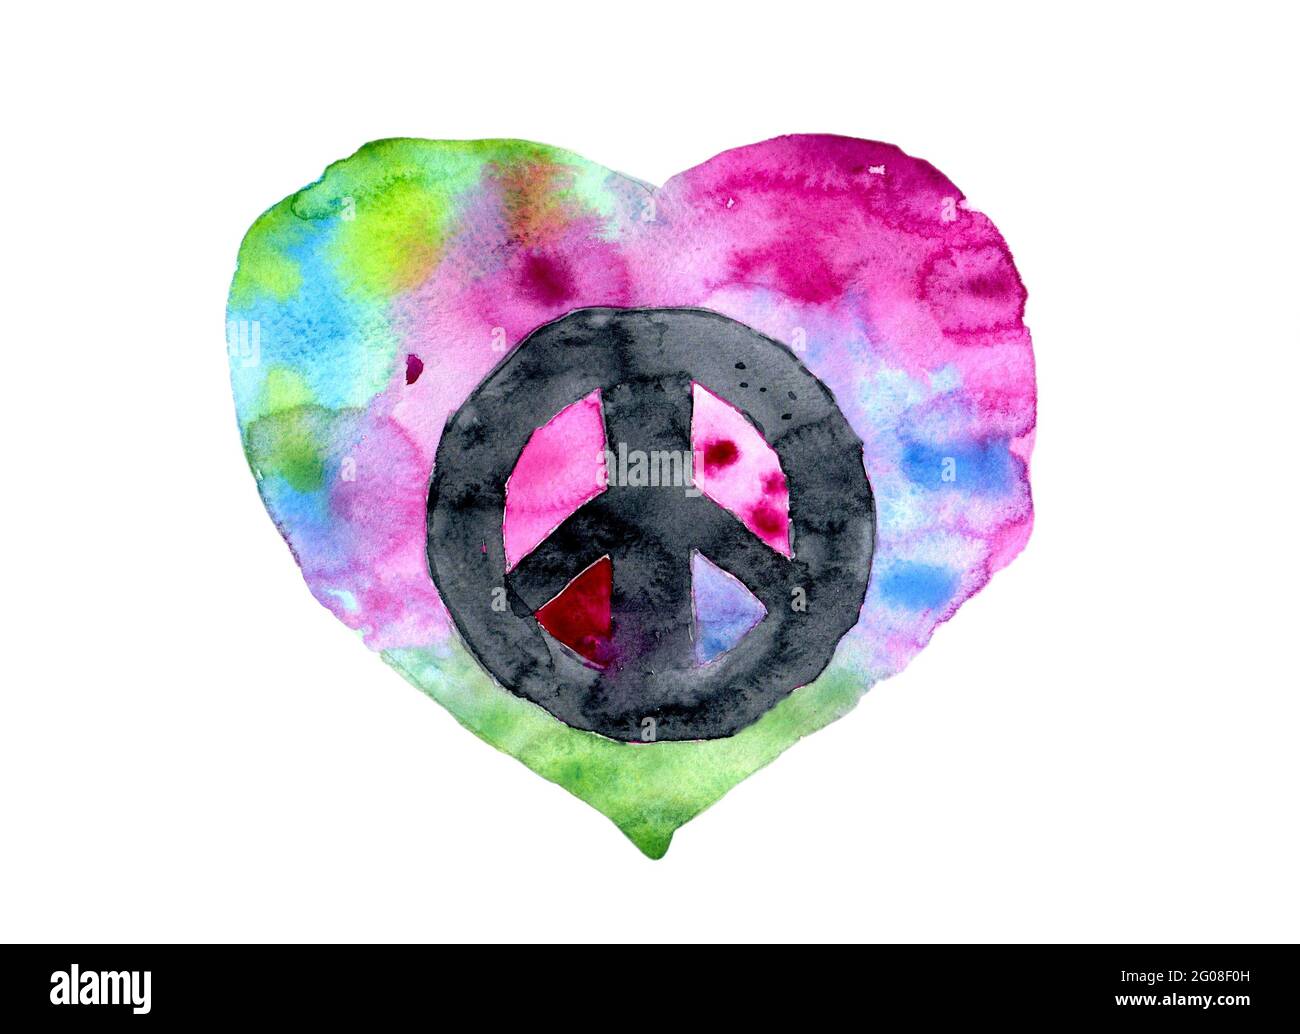 Peace sign watercolor tie dye illustration Stock Photo